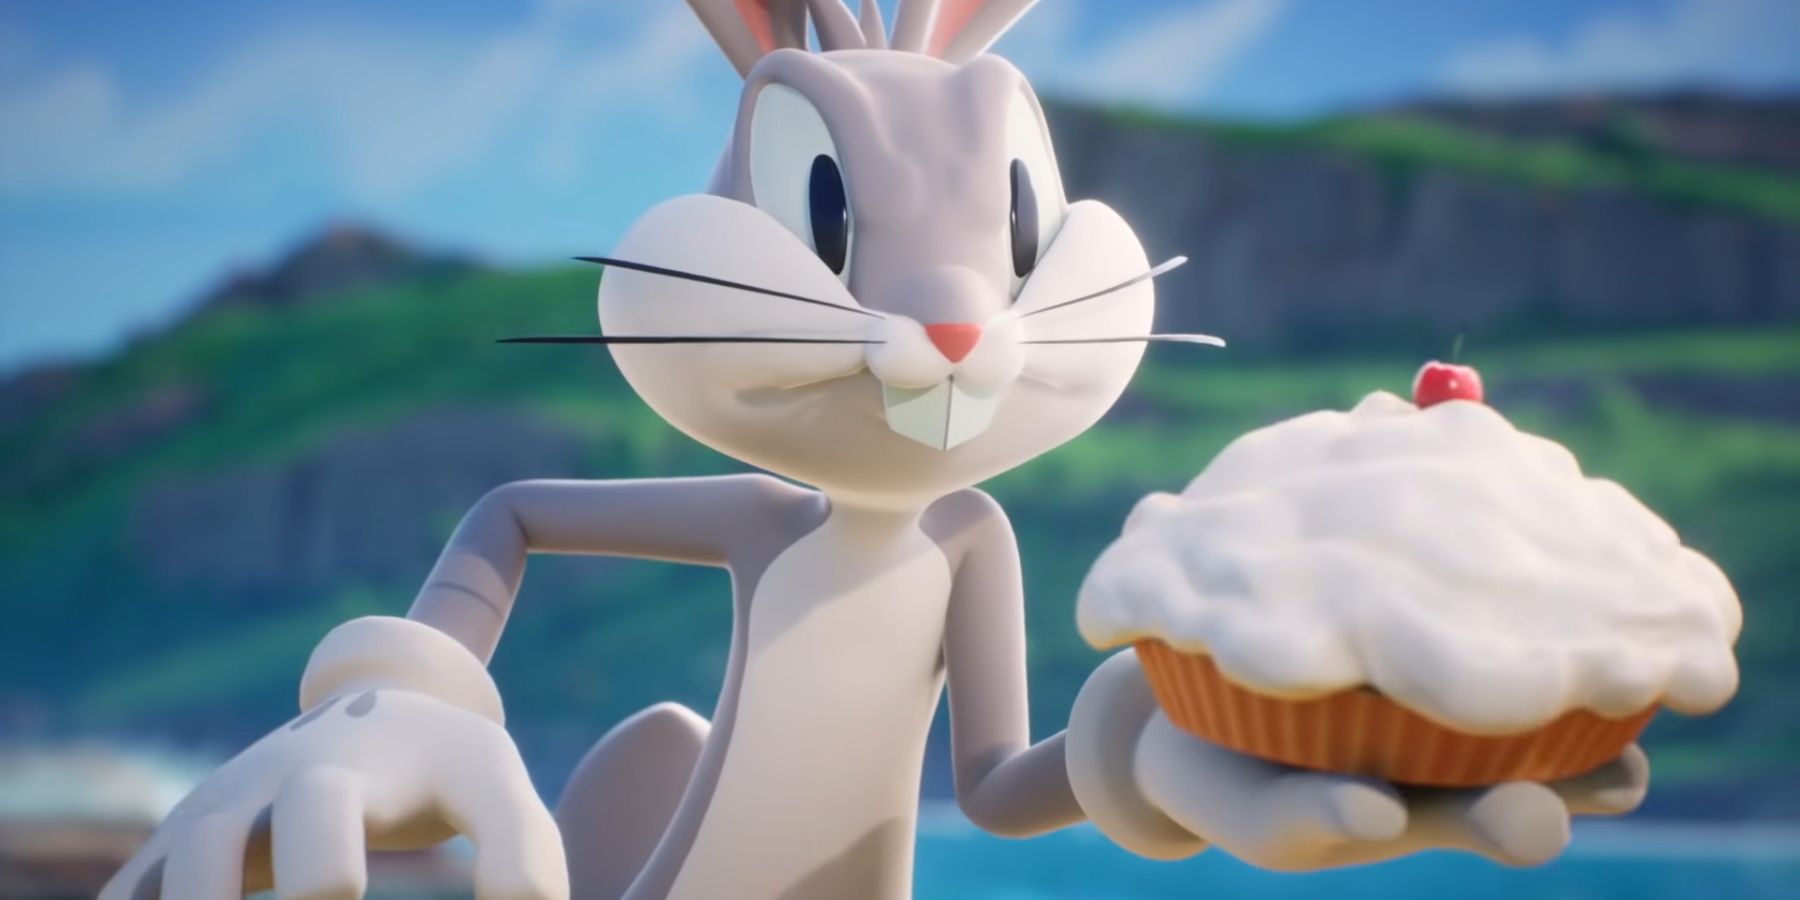 Bugs Bunny is currently the best character in MultiVersus.